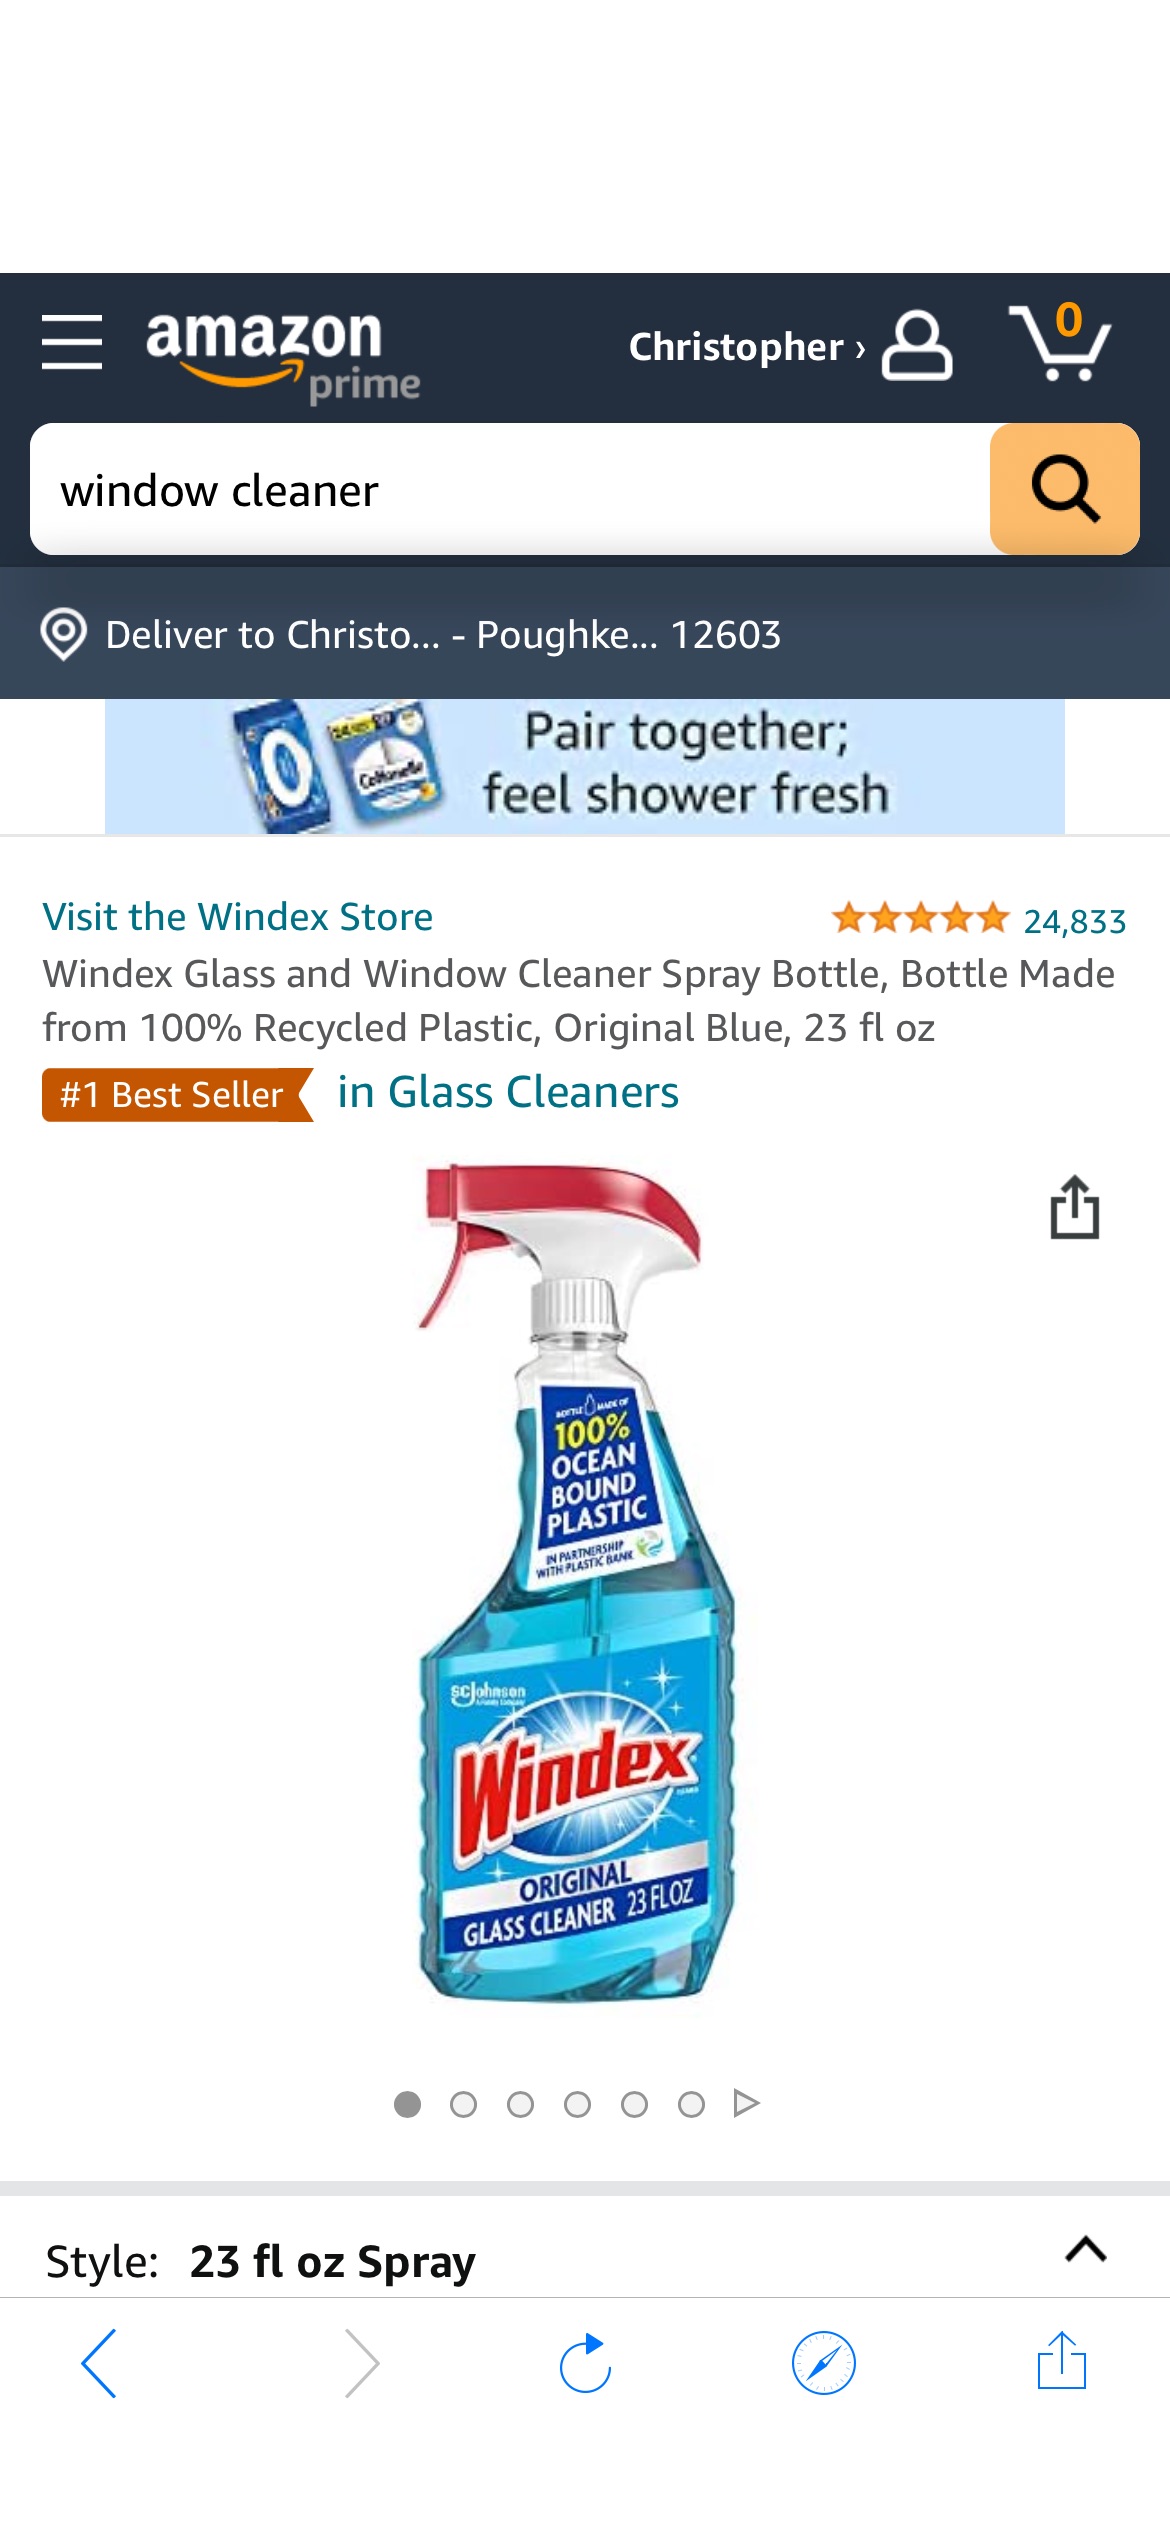 Amazon.com: Windex Glass and Window Cleaner Spray Bottle, Bottle Made from 100% Recycled Plastic, Original Blue, 23 fl oz : Everything Else玻璃清洁